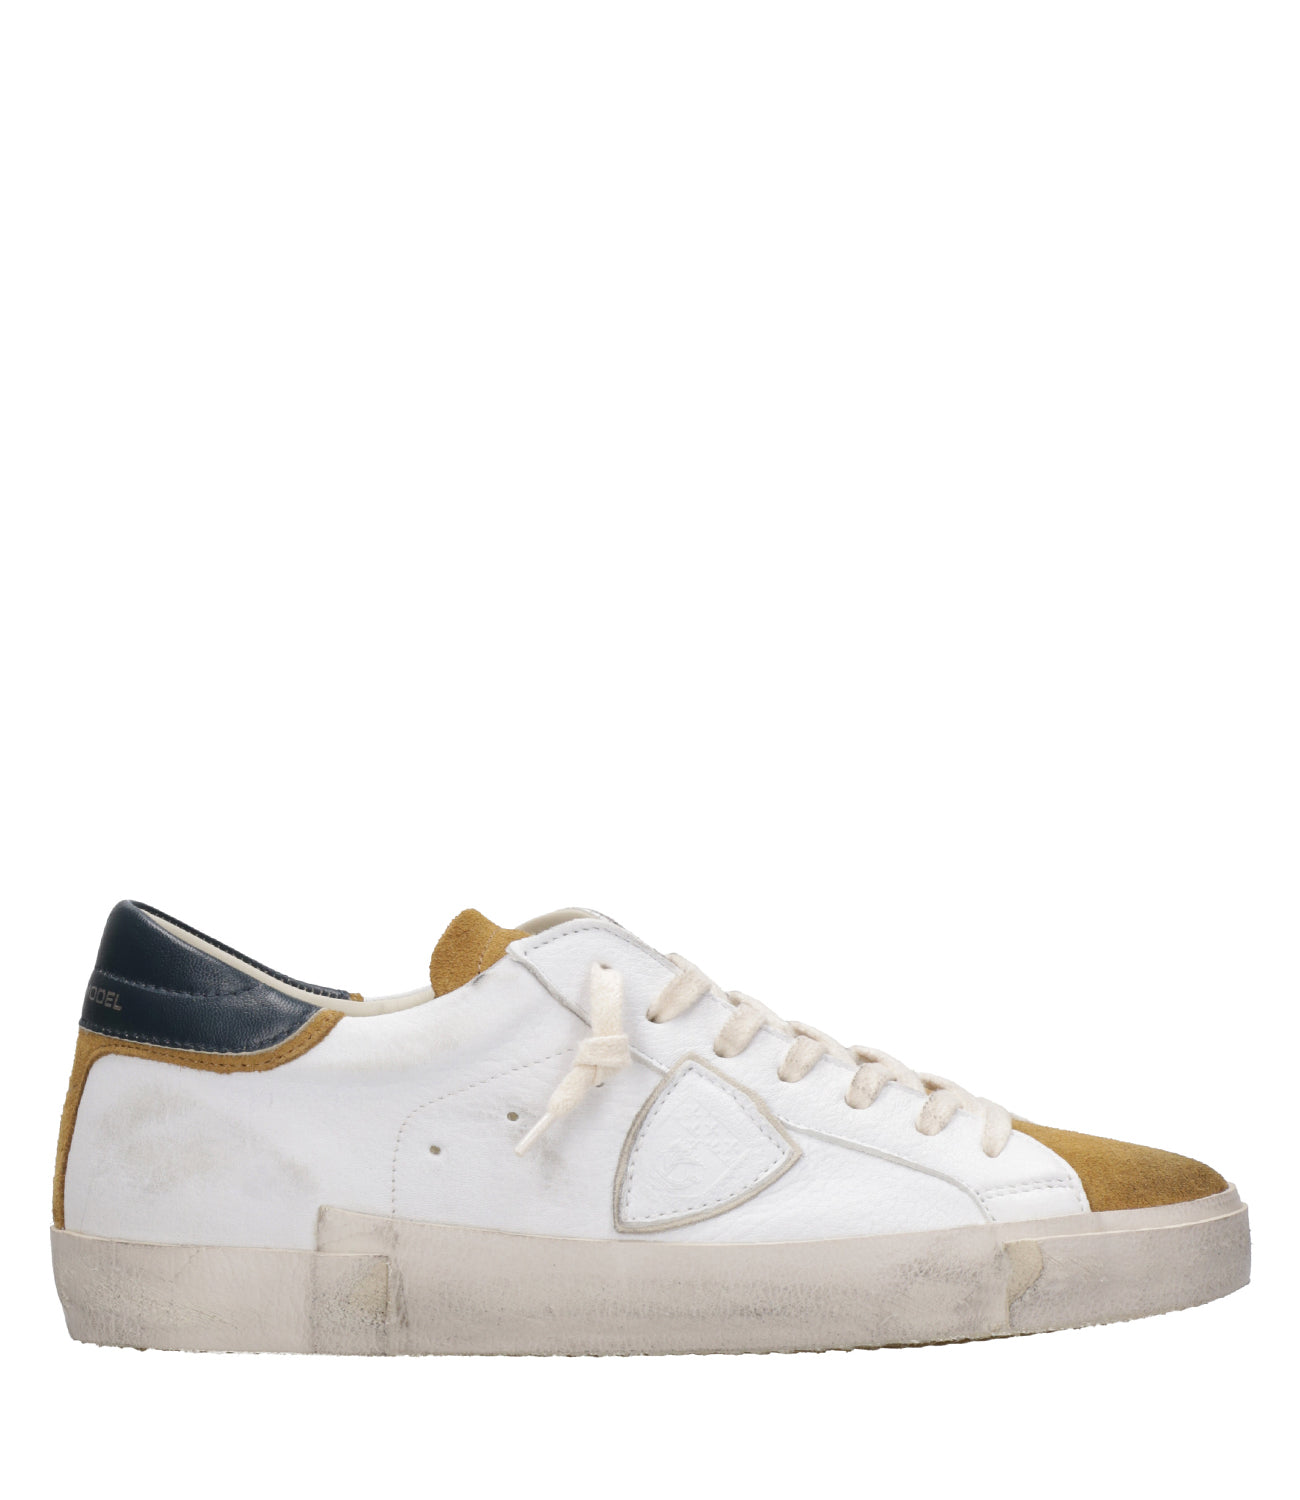 Philippe Model | PRSX Low White and Mustard Sneakers